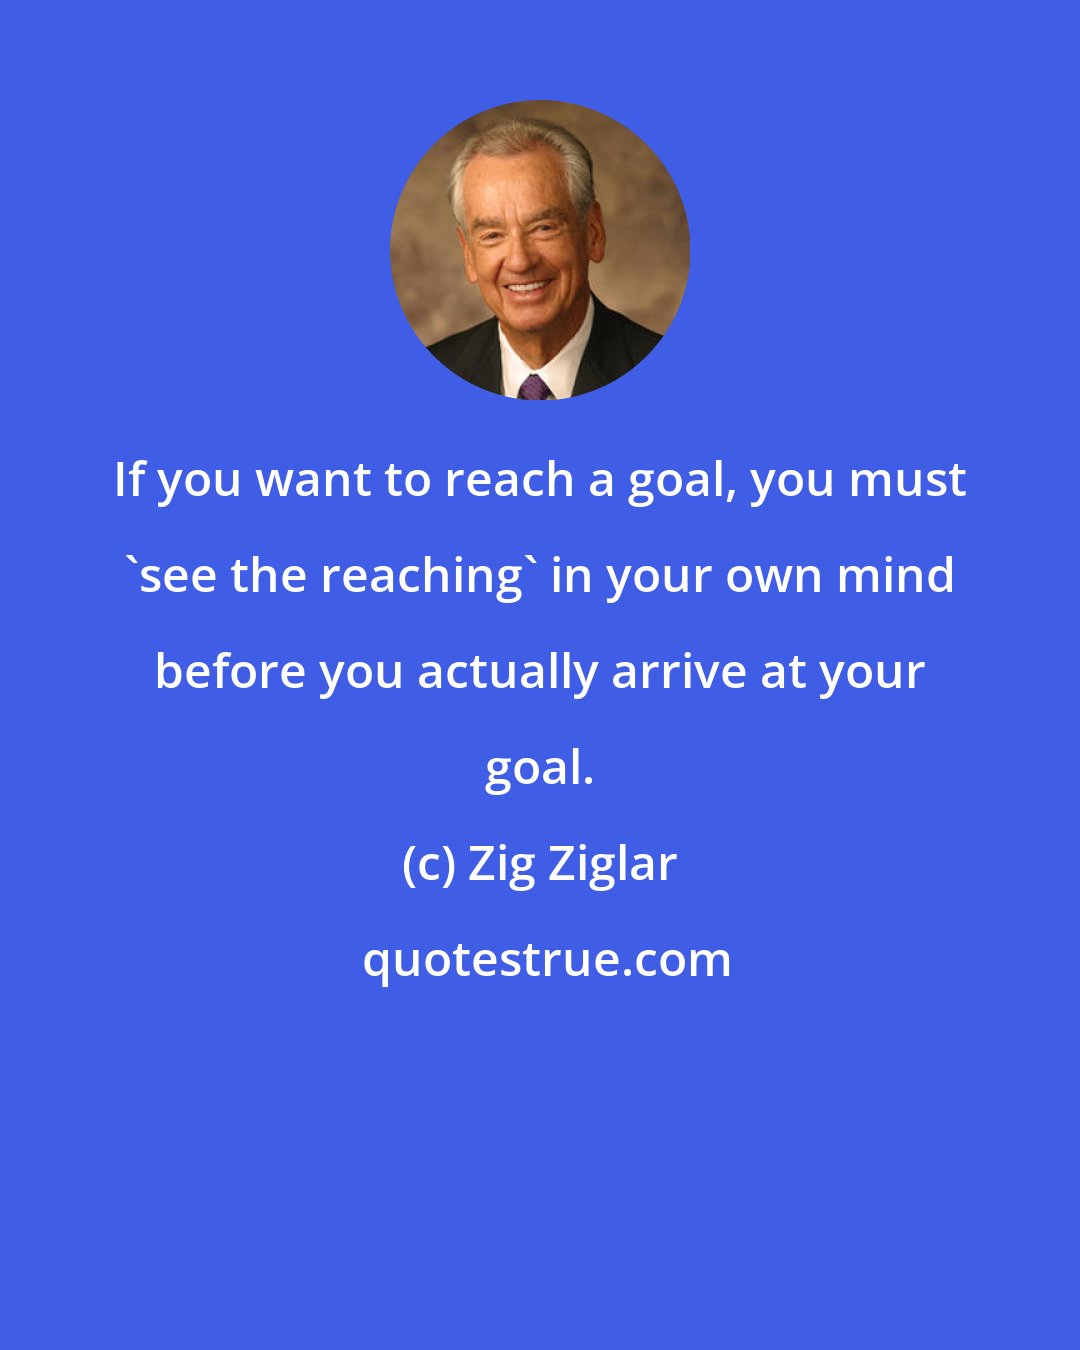 Zig Ziglar: If you want to reach a goal, you must 'see the reaching' in your own mind before you actually arrive at your goal.